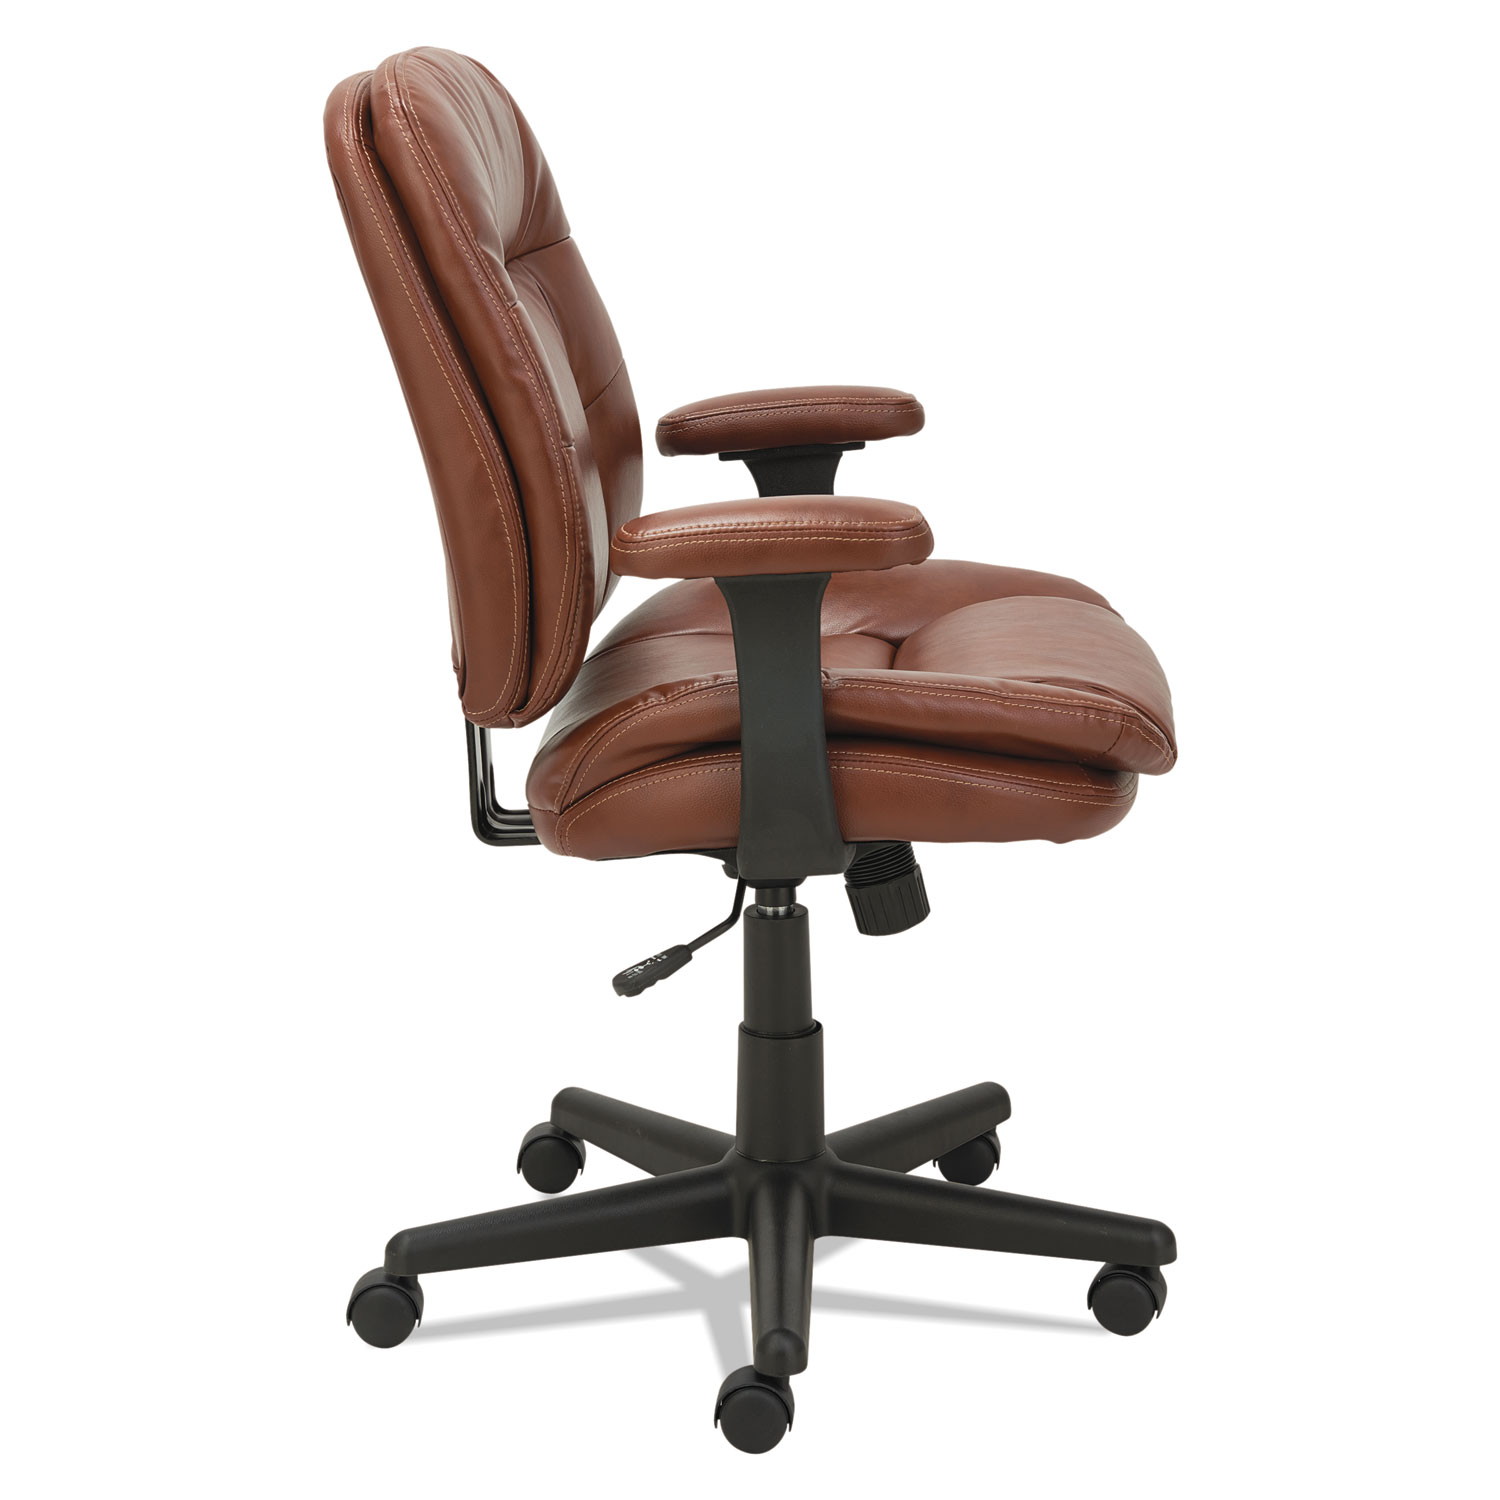 Swivel/Tilt Leather Task Chair, Supports up to 250 lbs., Chestnut Brown Seat/Chestnut Brown Back, Black Base